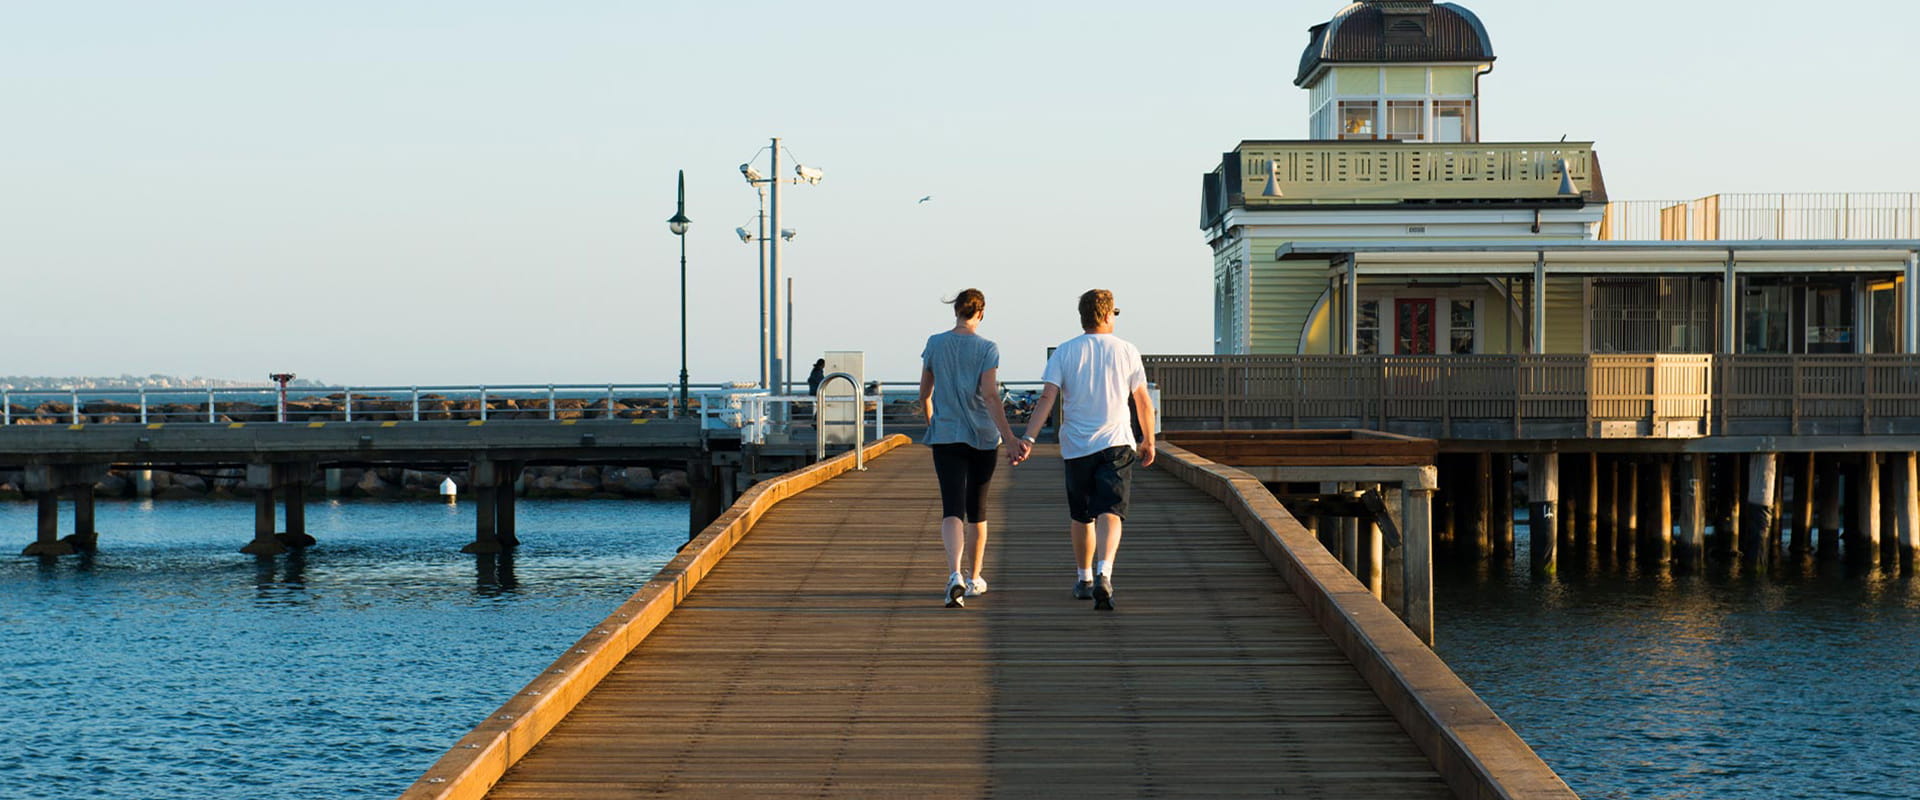 A man and woman hold hands while walking down a wooden pier towards a historic building and a stone breakwater.